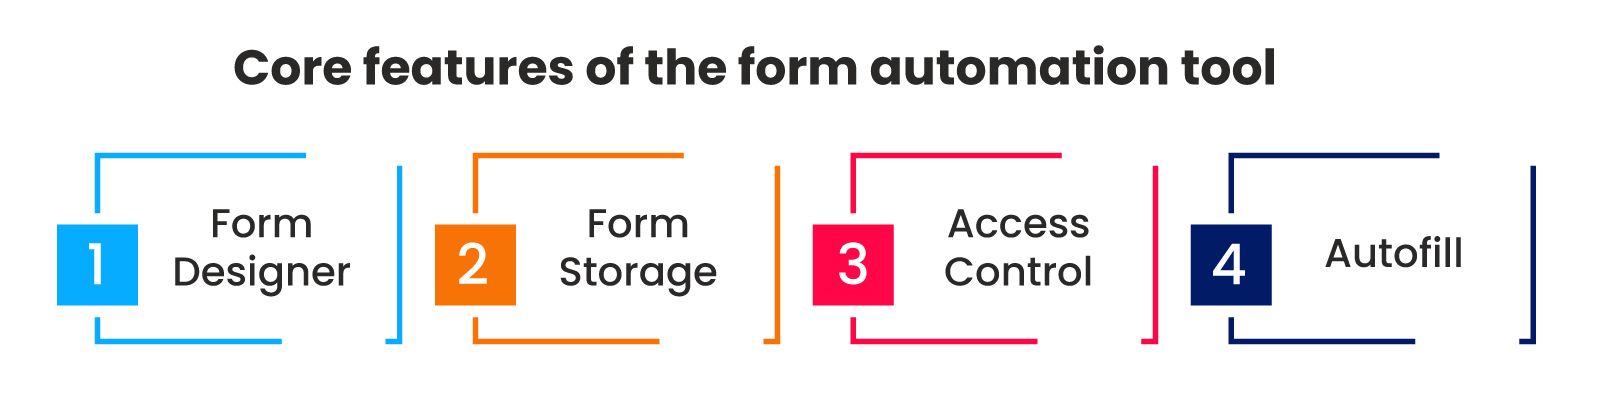 Core features of the form automation tool